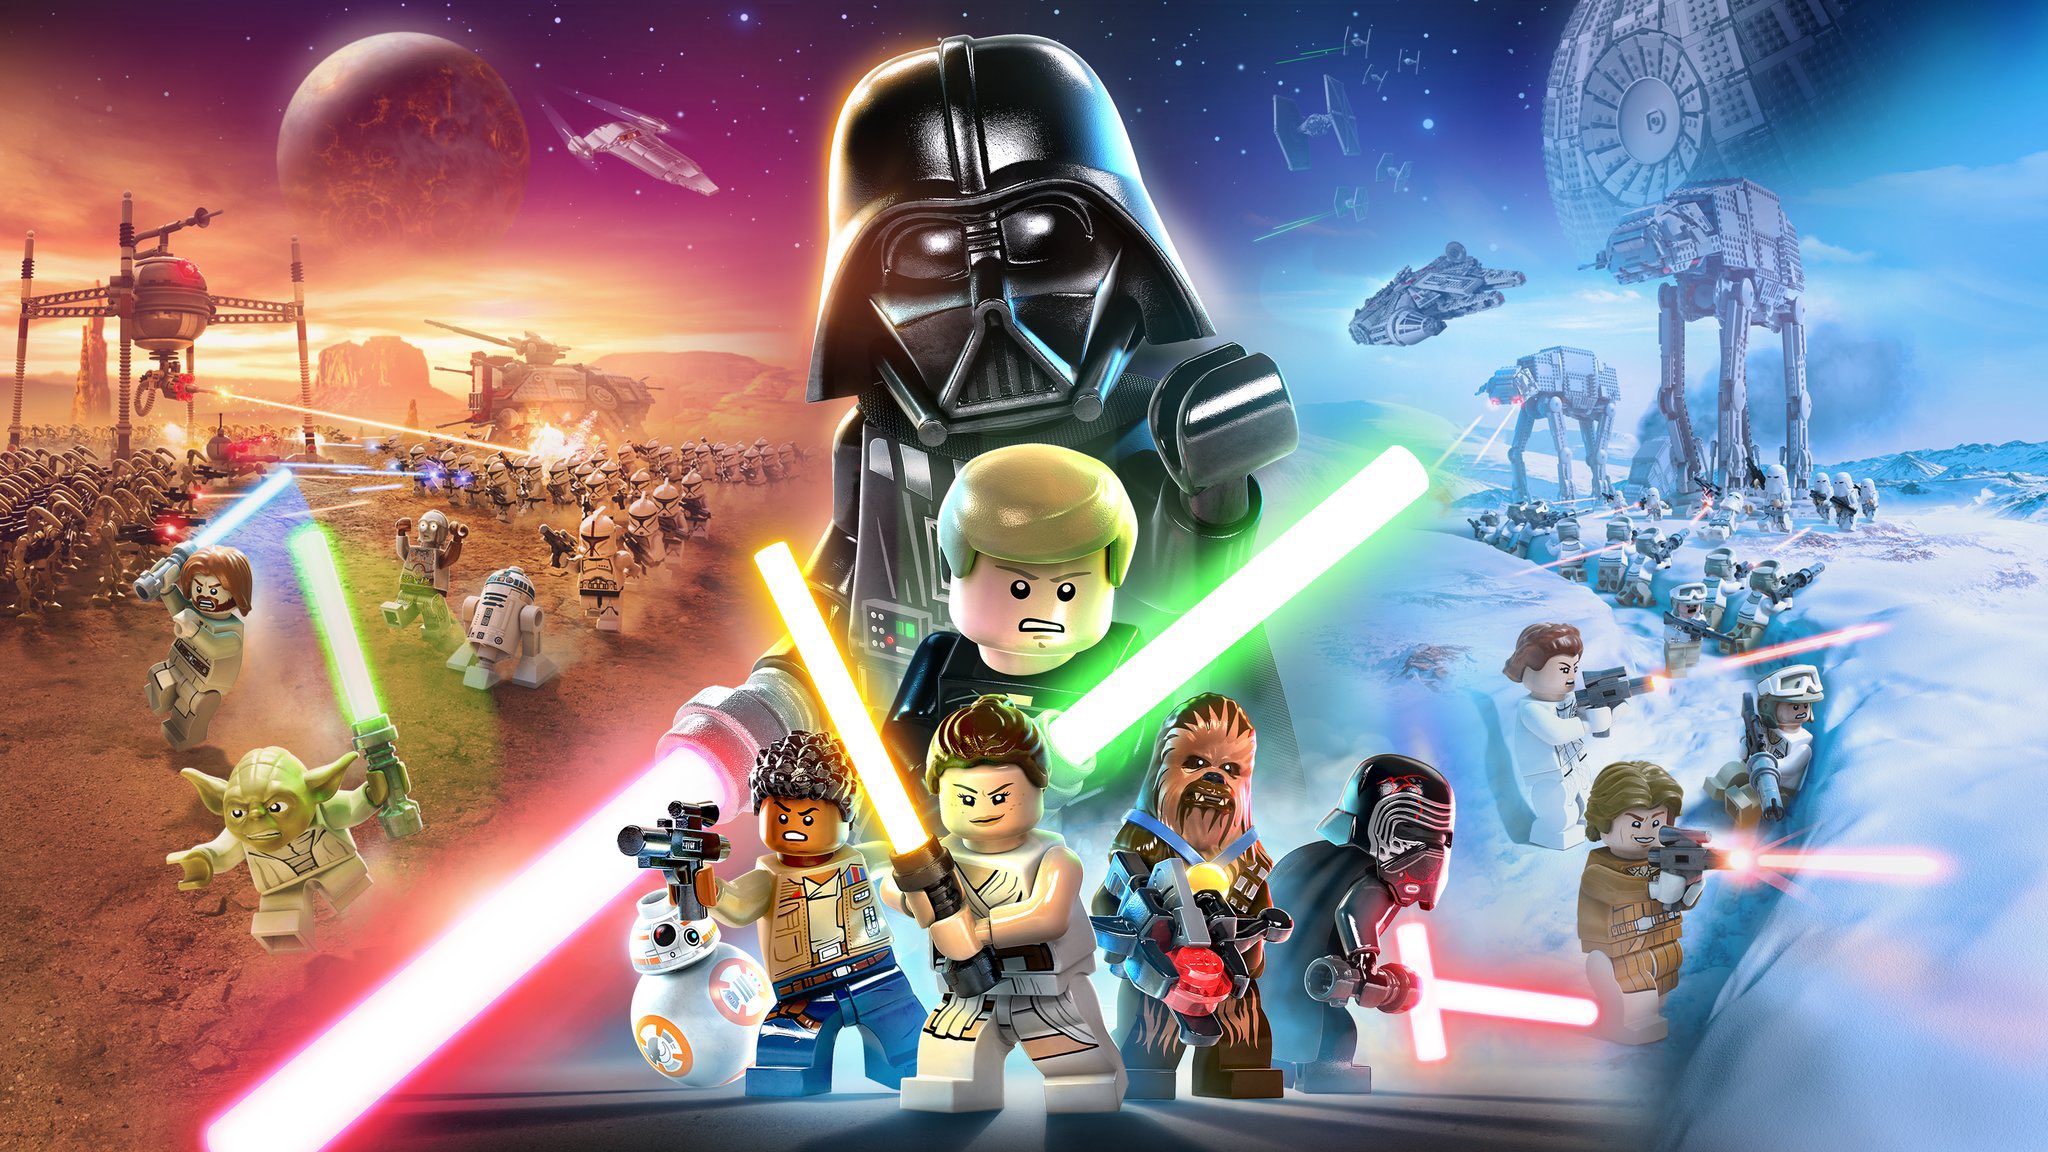 LEGO Star Wars News PS LEGO Star Wars: The Skywalker Saga will be available to Pre Load April 3rd. The game will be around 38GB without the Day one